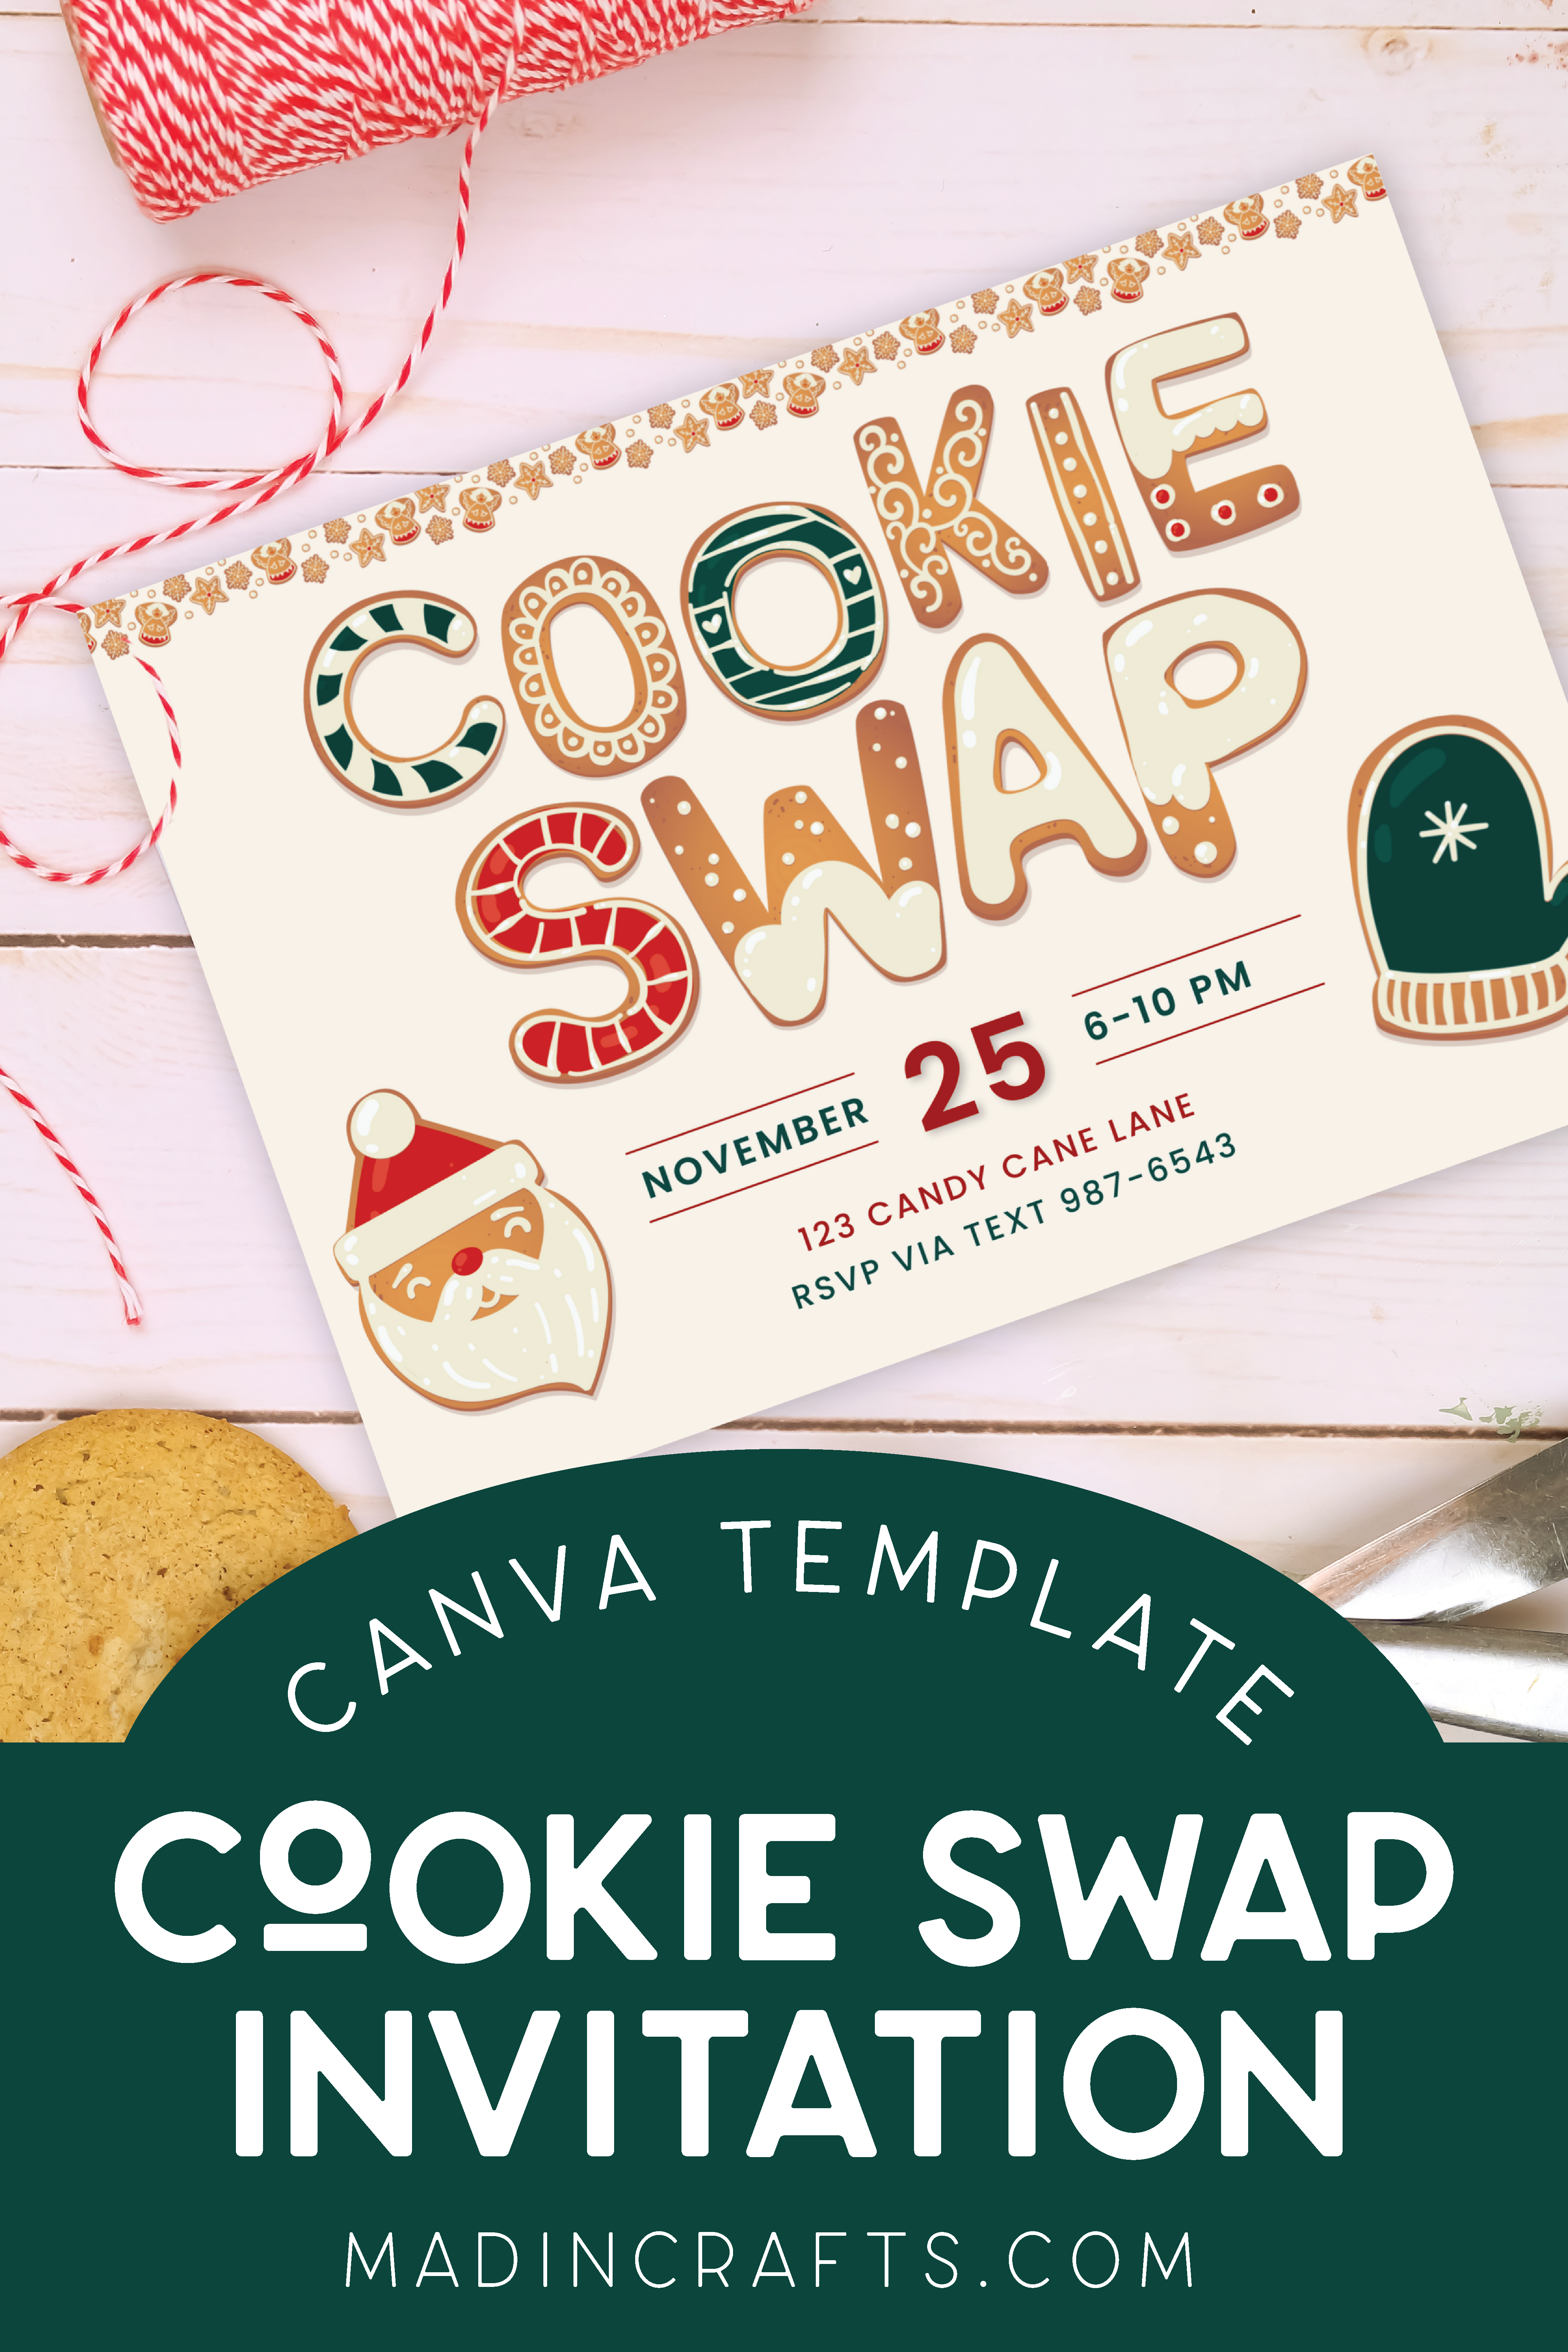 Cookie Swap Party Invitation surrounded by baker's twine and cookies